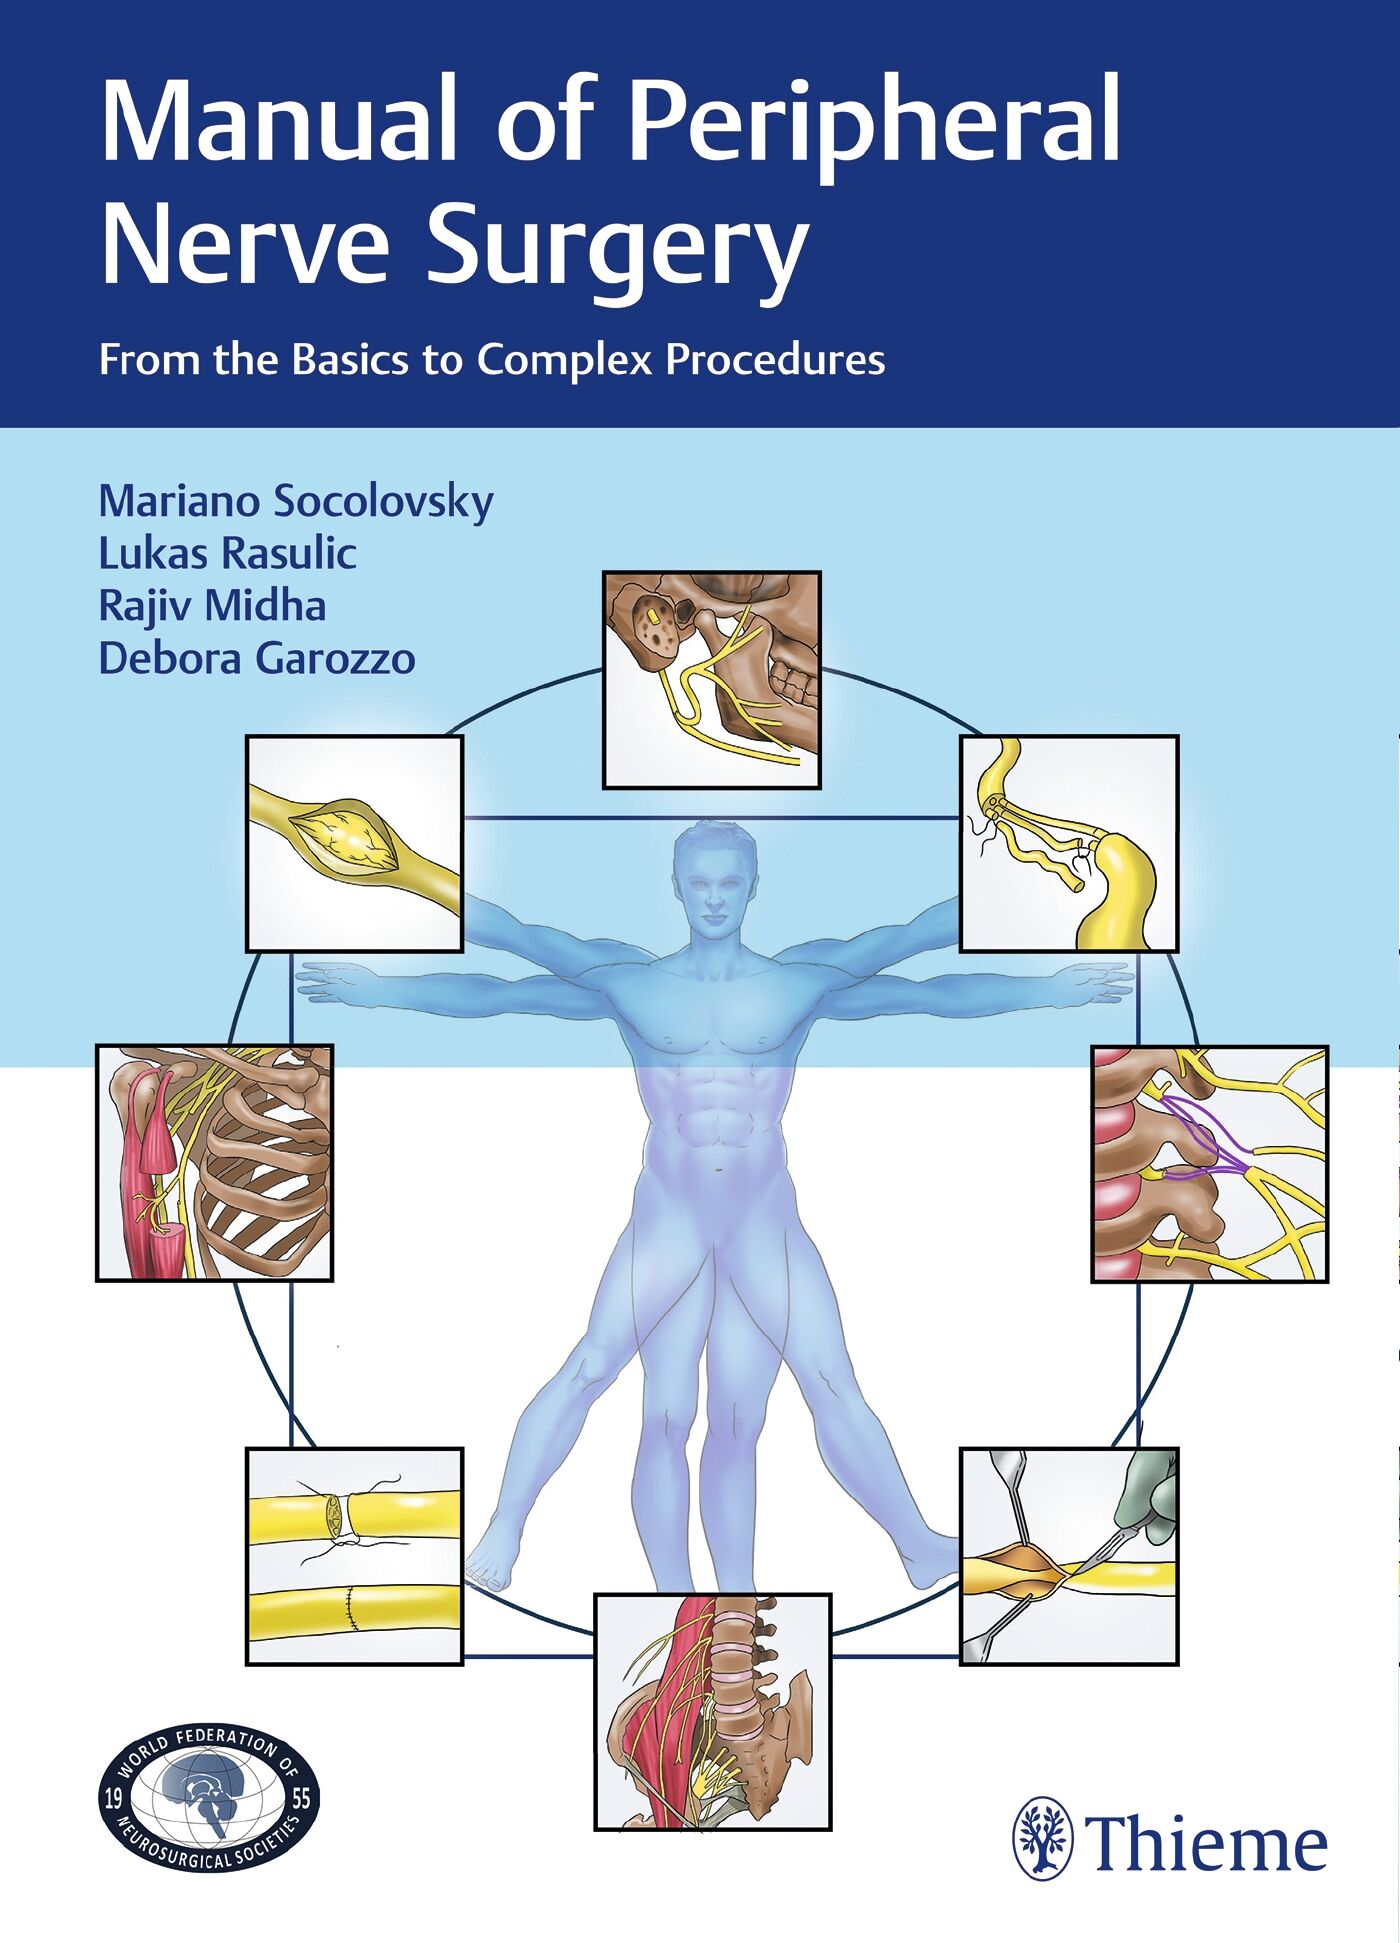 Manual of Peripheral Nerve Surgery, 9783132409552